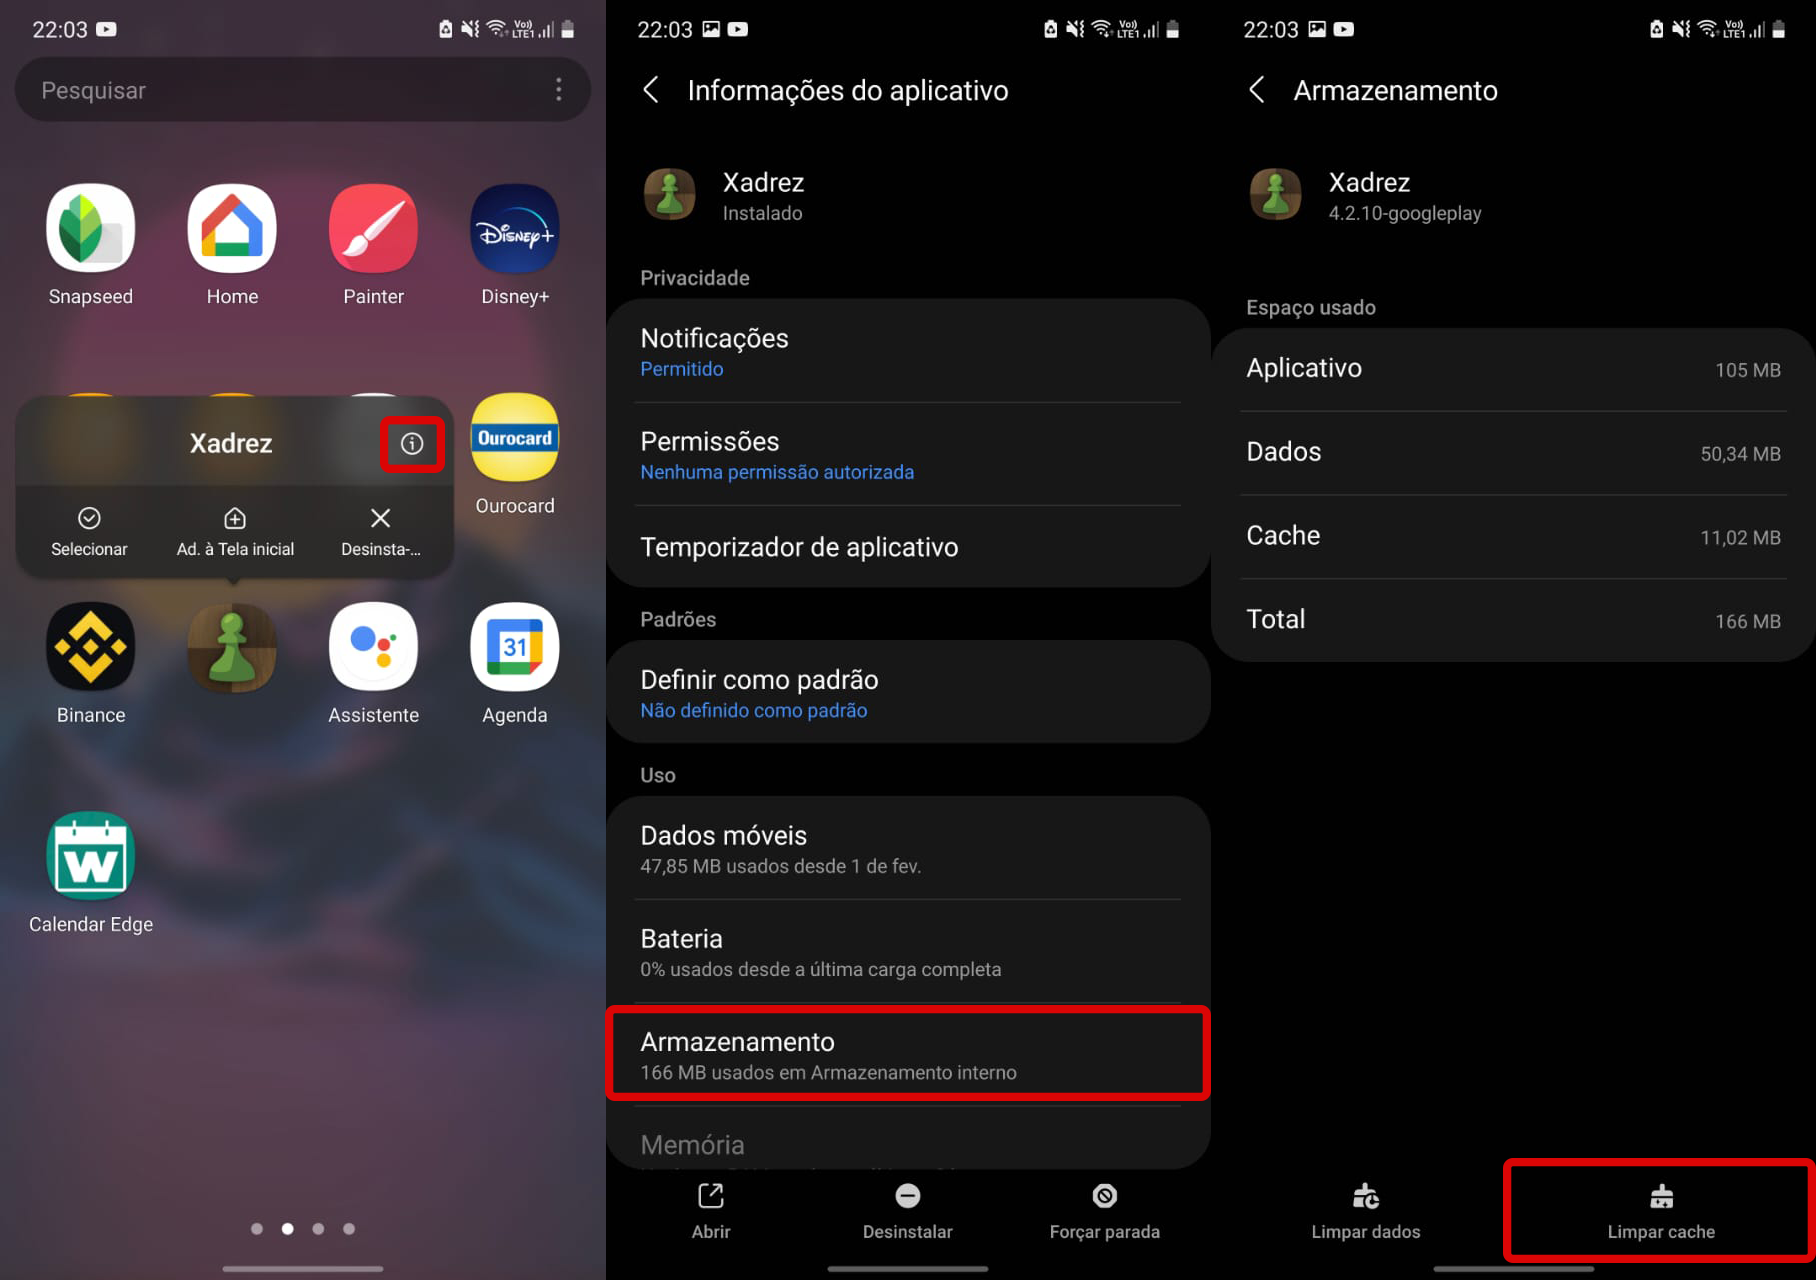 Steps to clear an application’s cache on Android. (Source: Adriano Camacho)